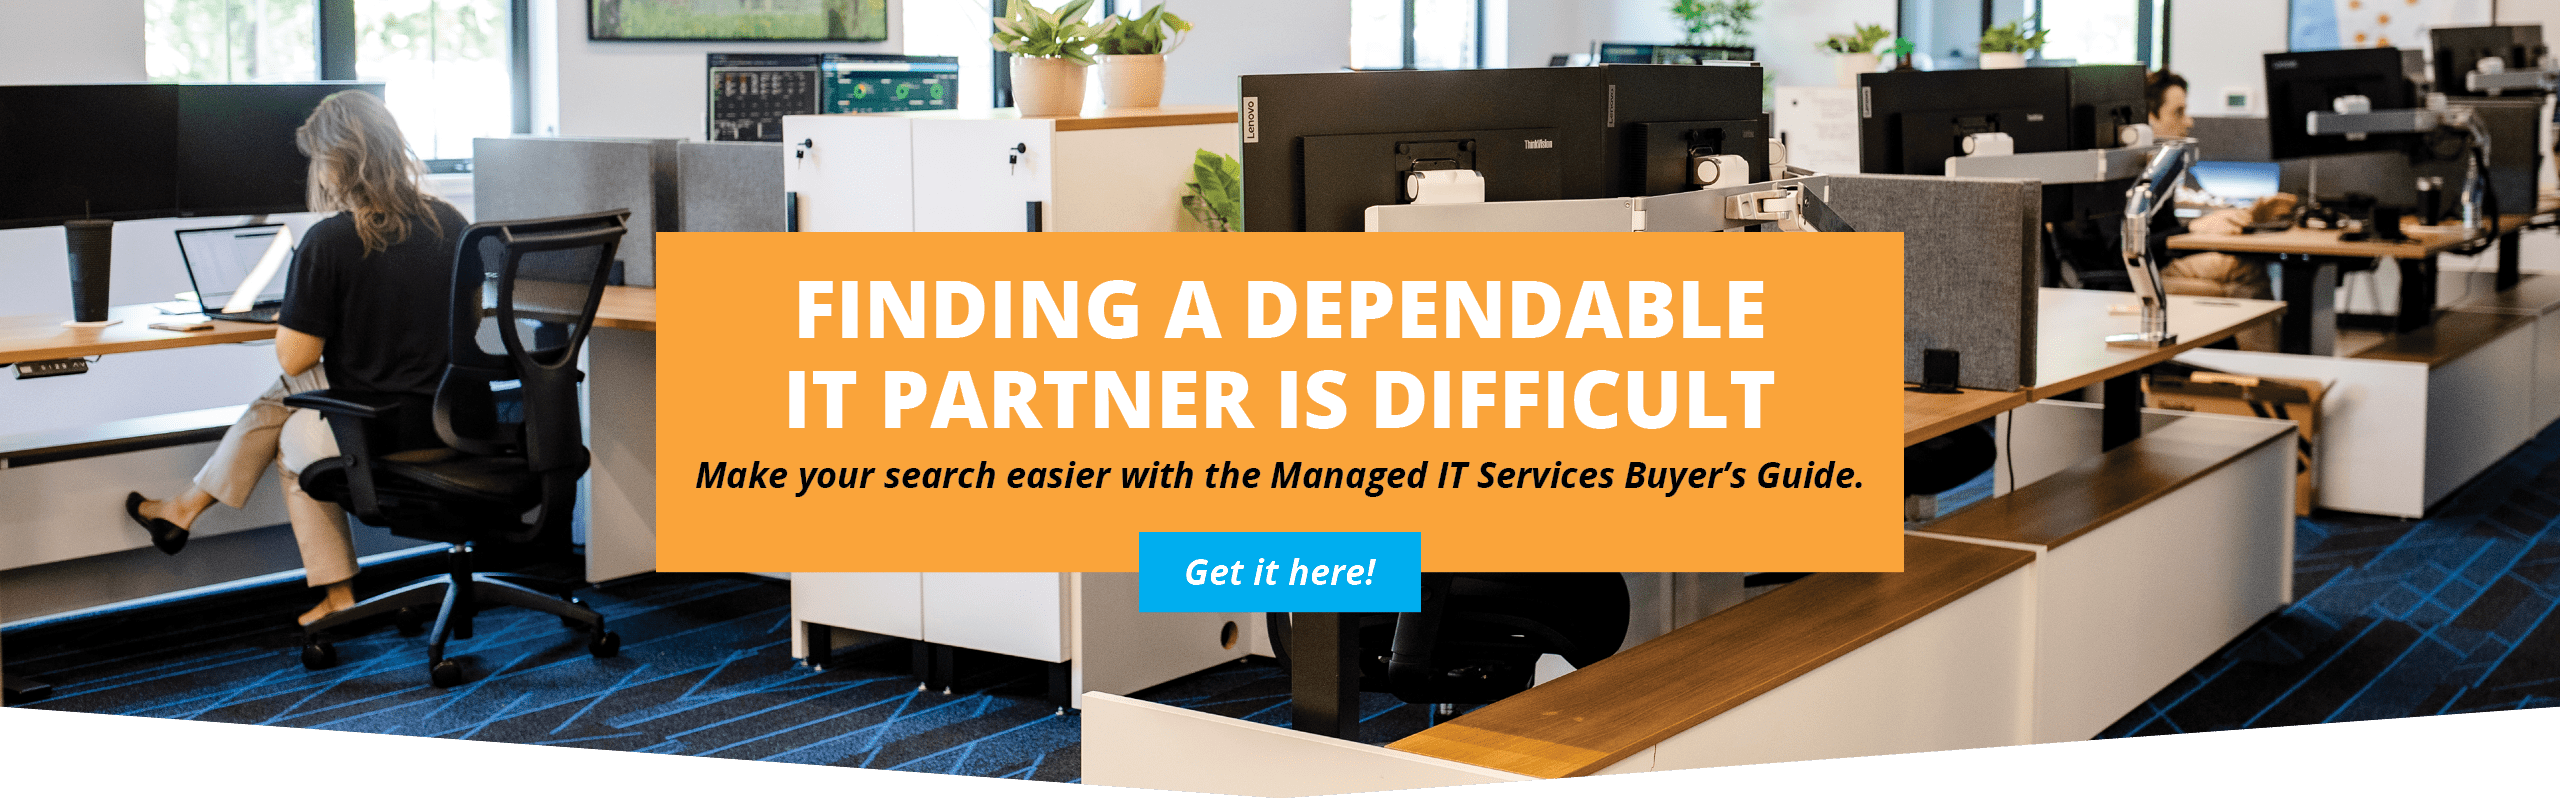 Finding a dependable it partner is difficult. Make your search easier with the managed IT services buyer's guide.